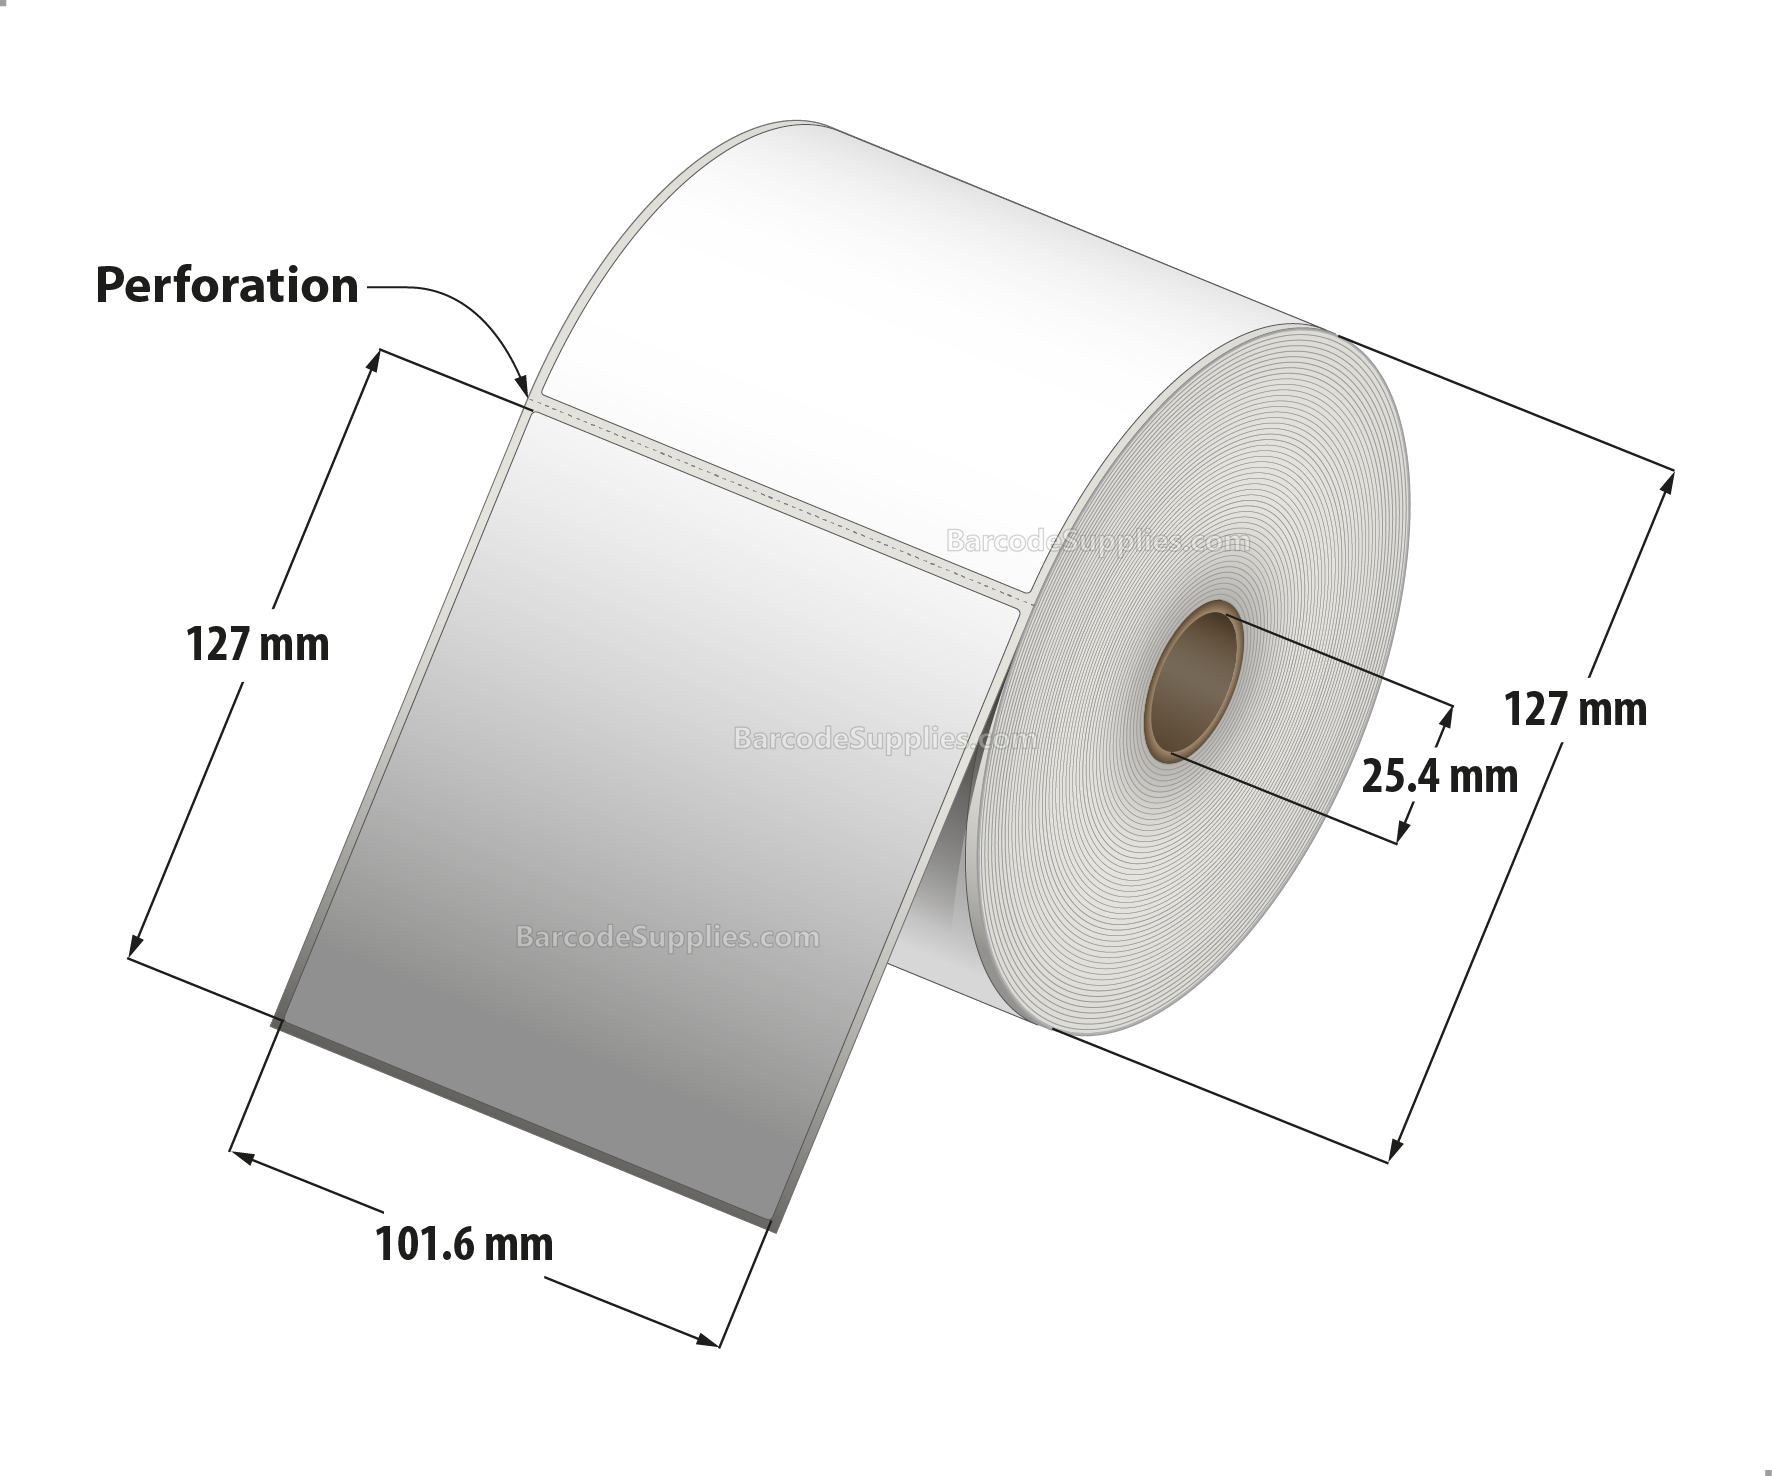 4 x 5 Direct Thermal White Labels With Permanent Acrylic Adhesive - Perforated - 565 Labels Per Roll - Carton Of 4 Rolls - 2260 Labels Total - MPN: DT45-15PDT